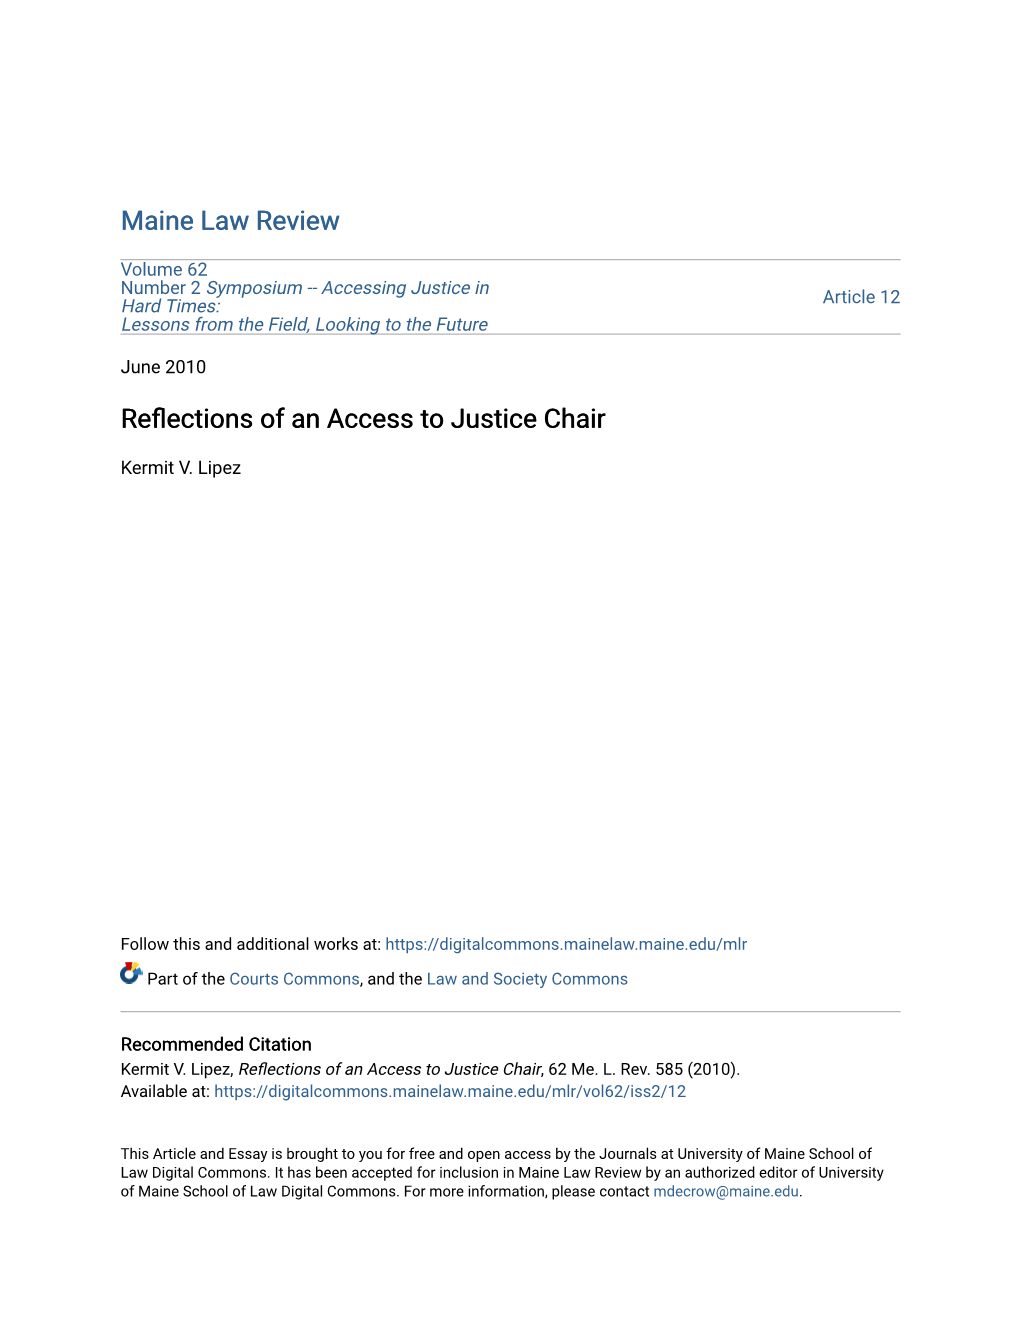 Reflections of an Access to Justice Chair